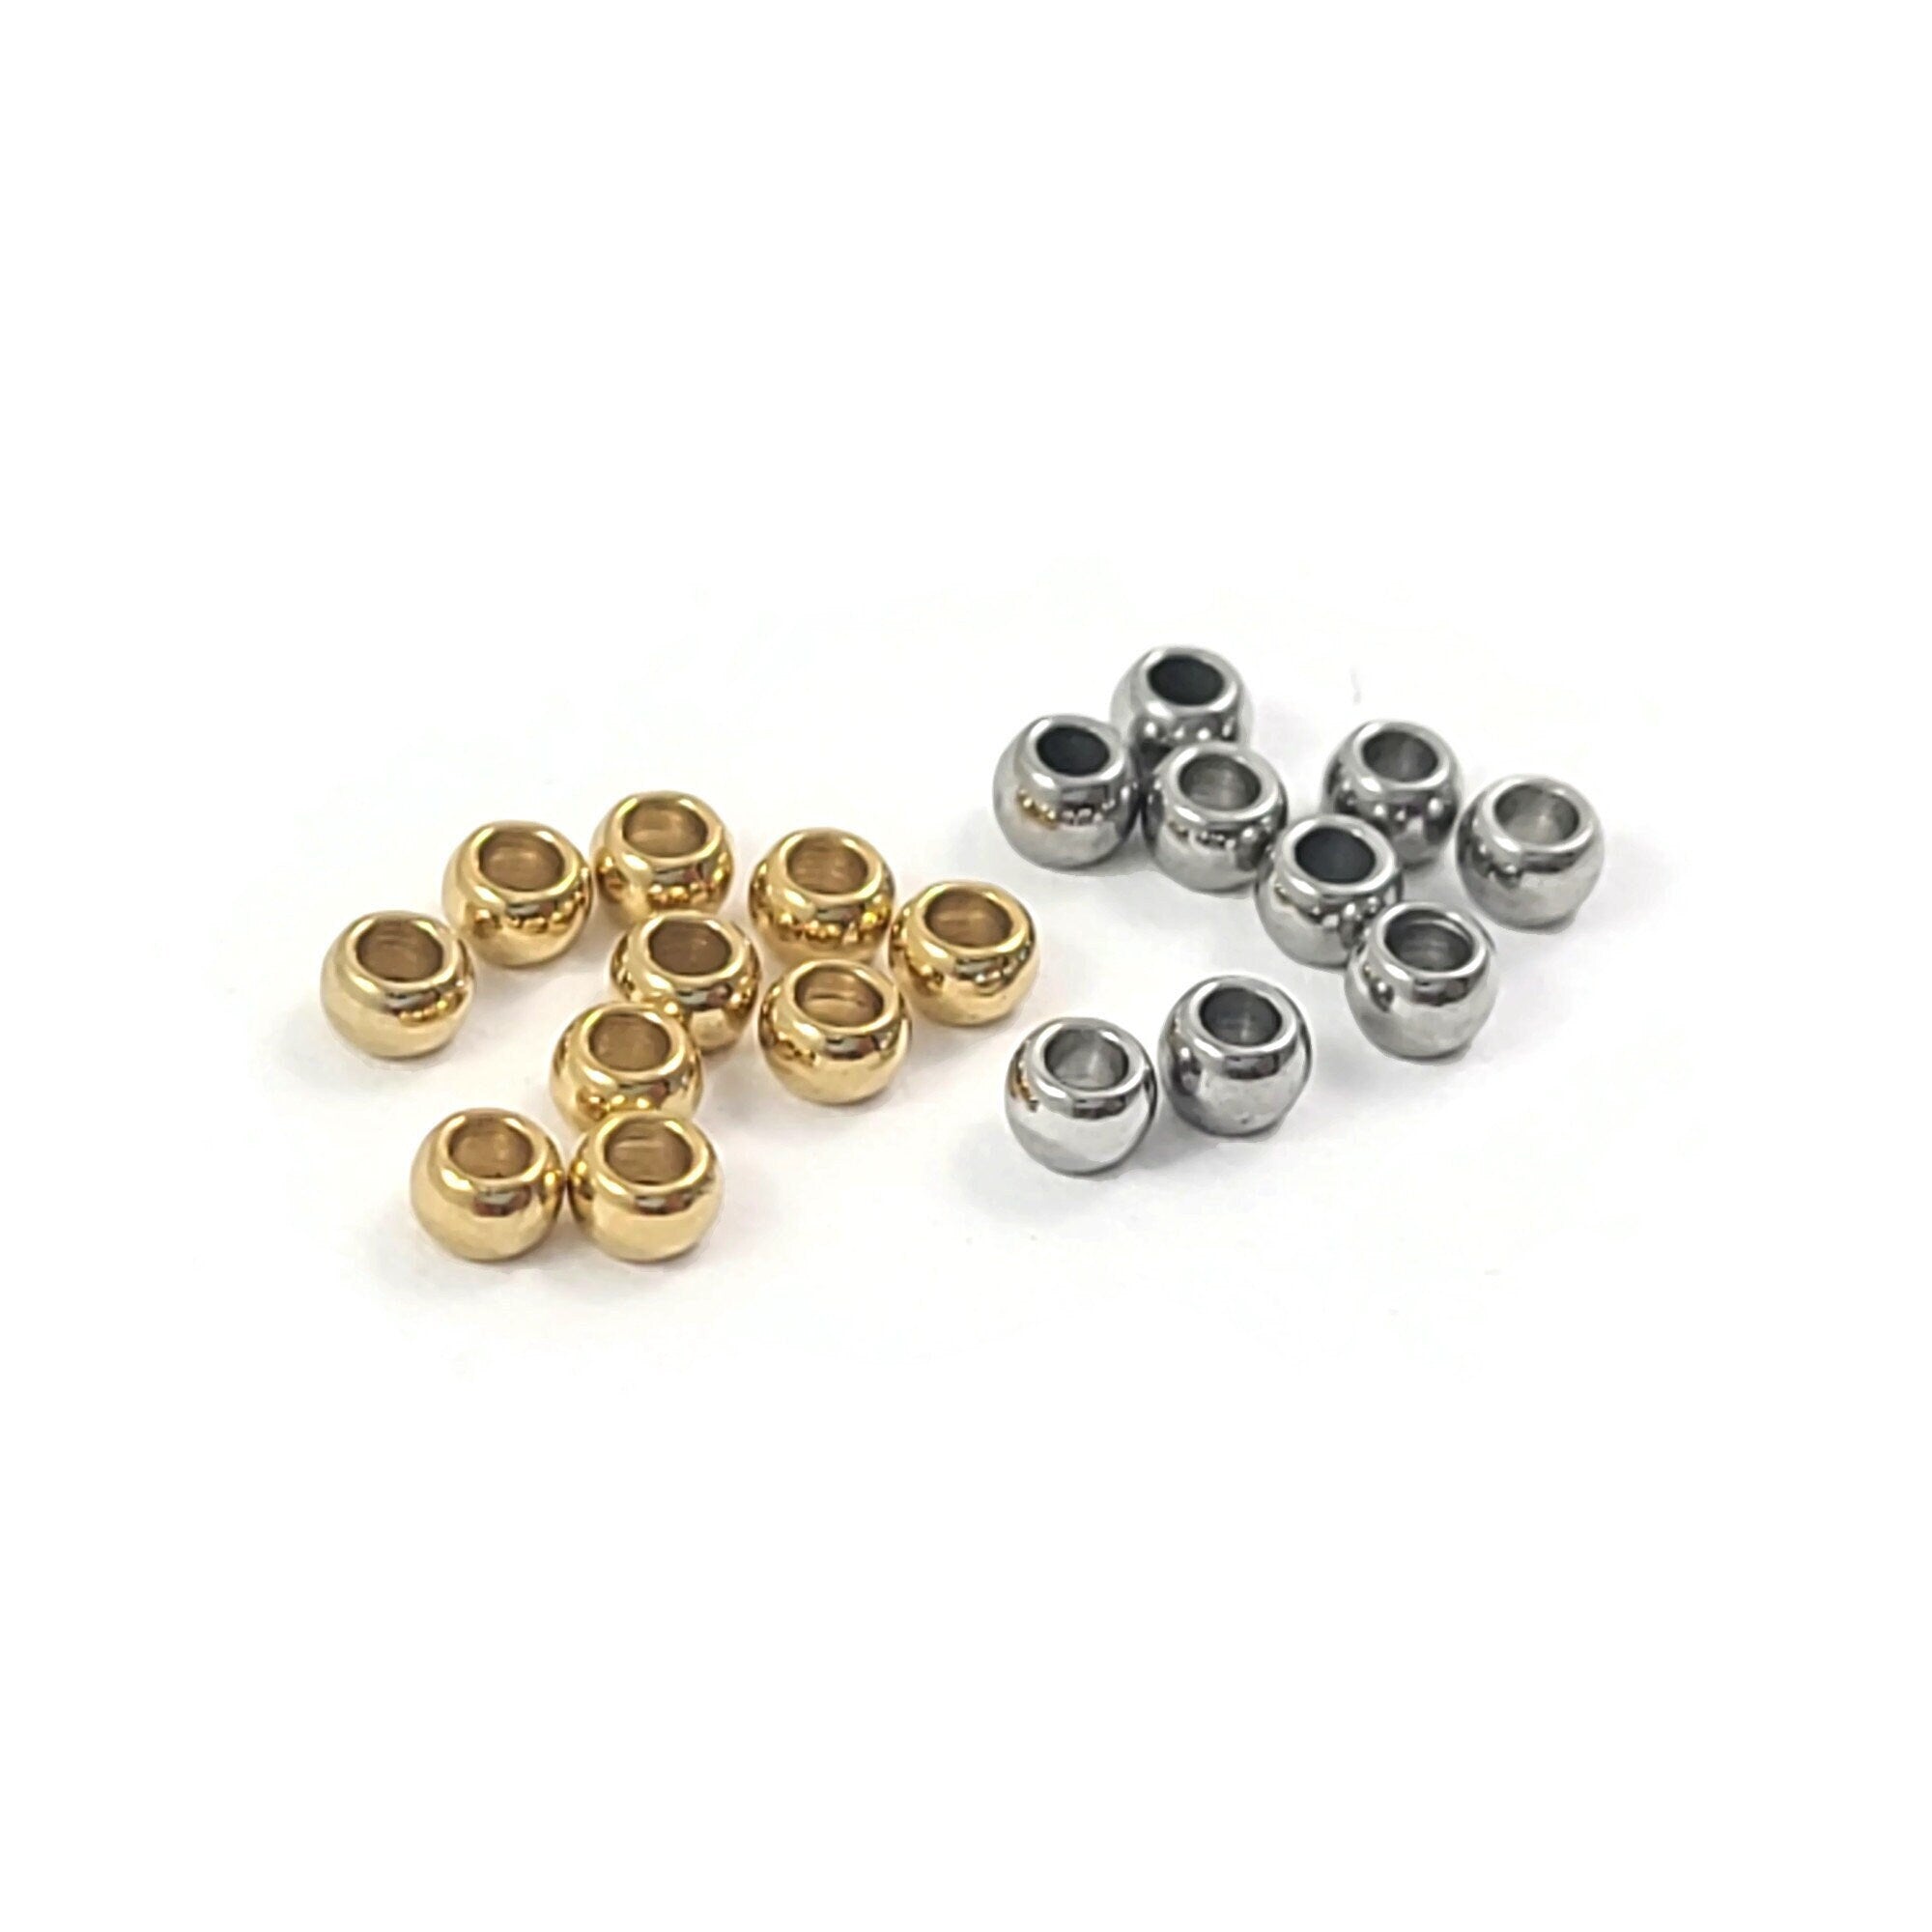 Surgical stainless steel crimp beads, Hypoallergenic jewelry making findings, Gold silver rondelle